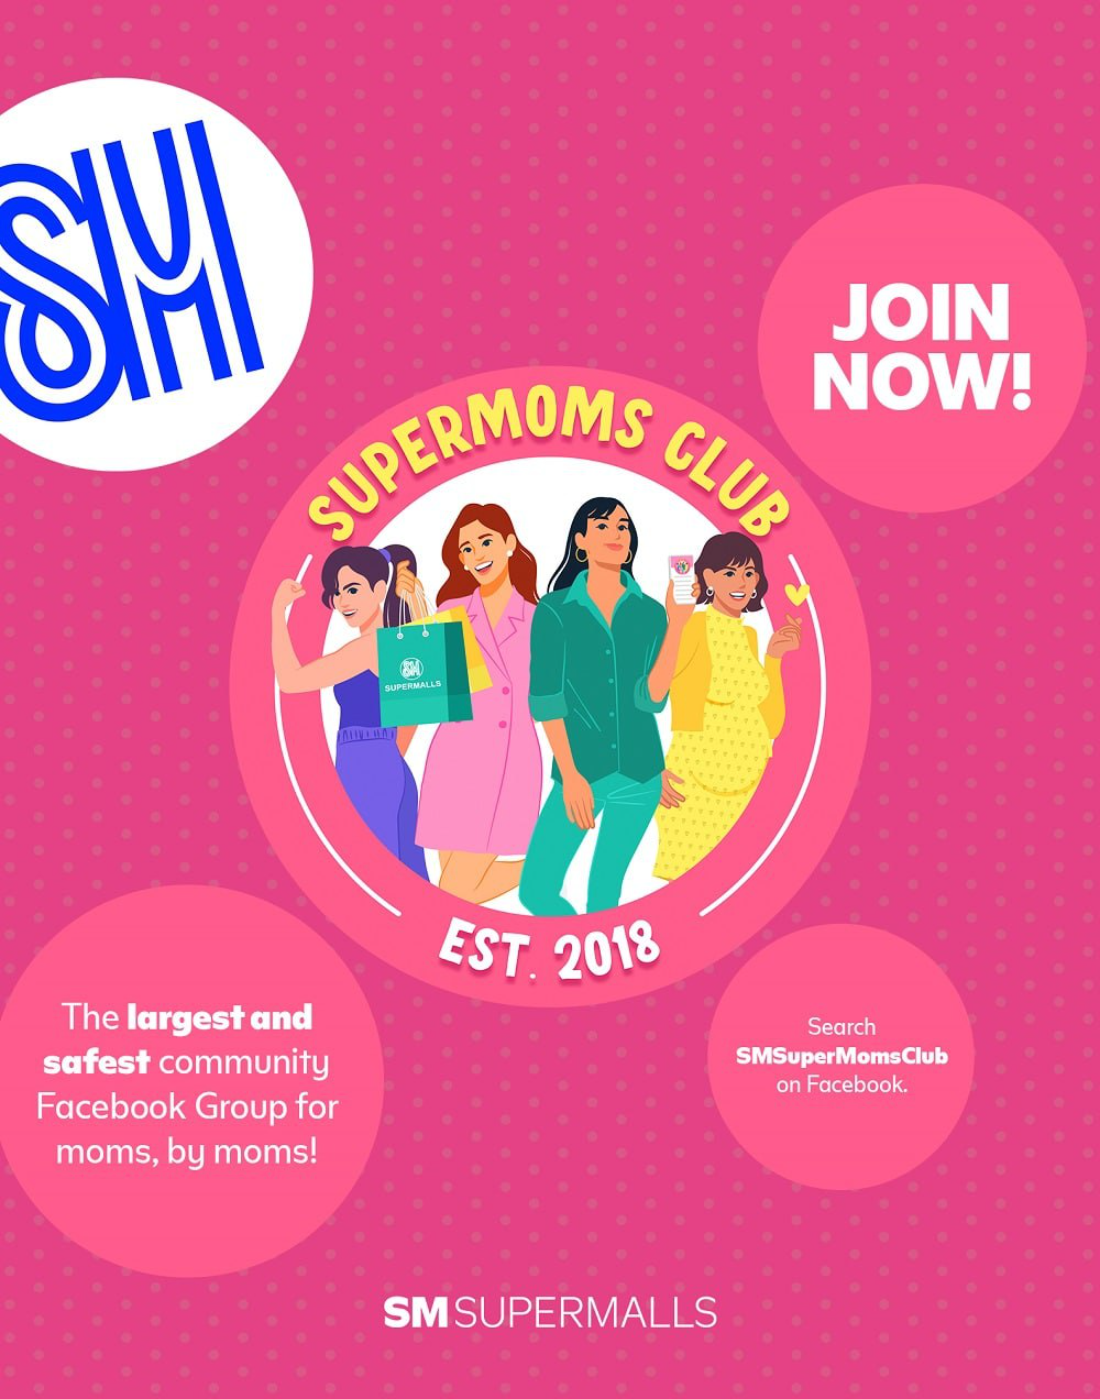 Why Should You Join SuperMoms Club?